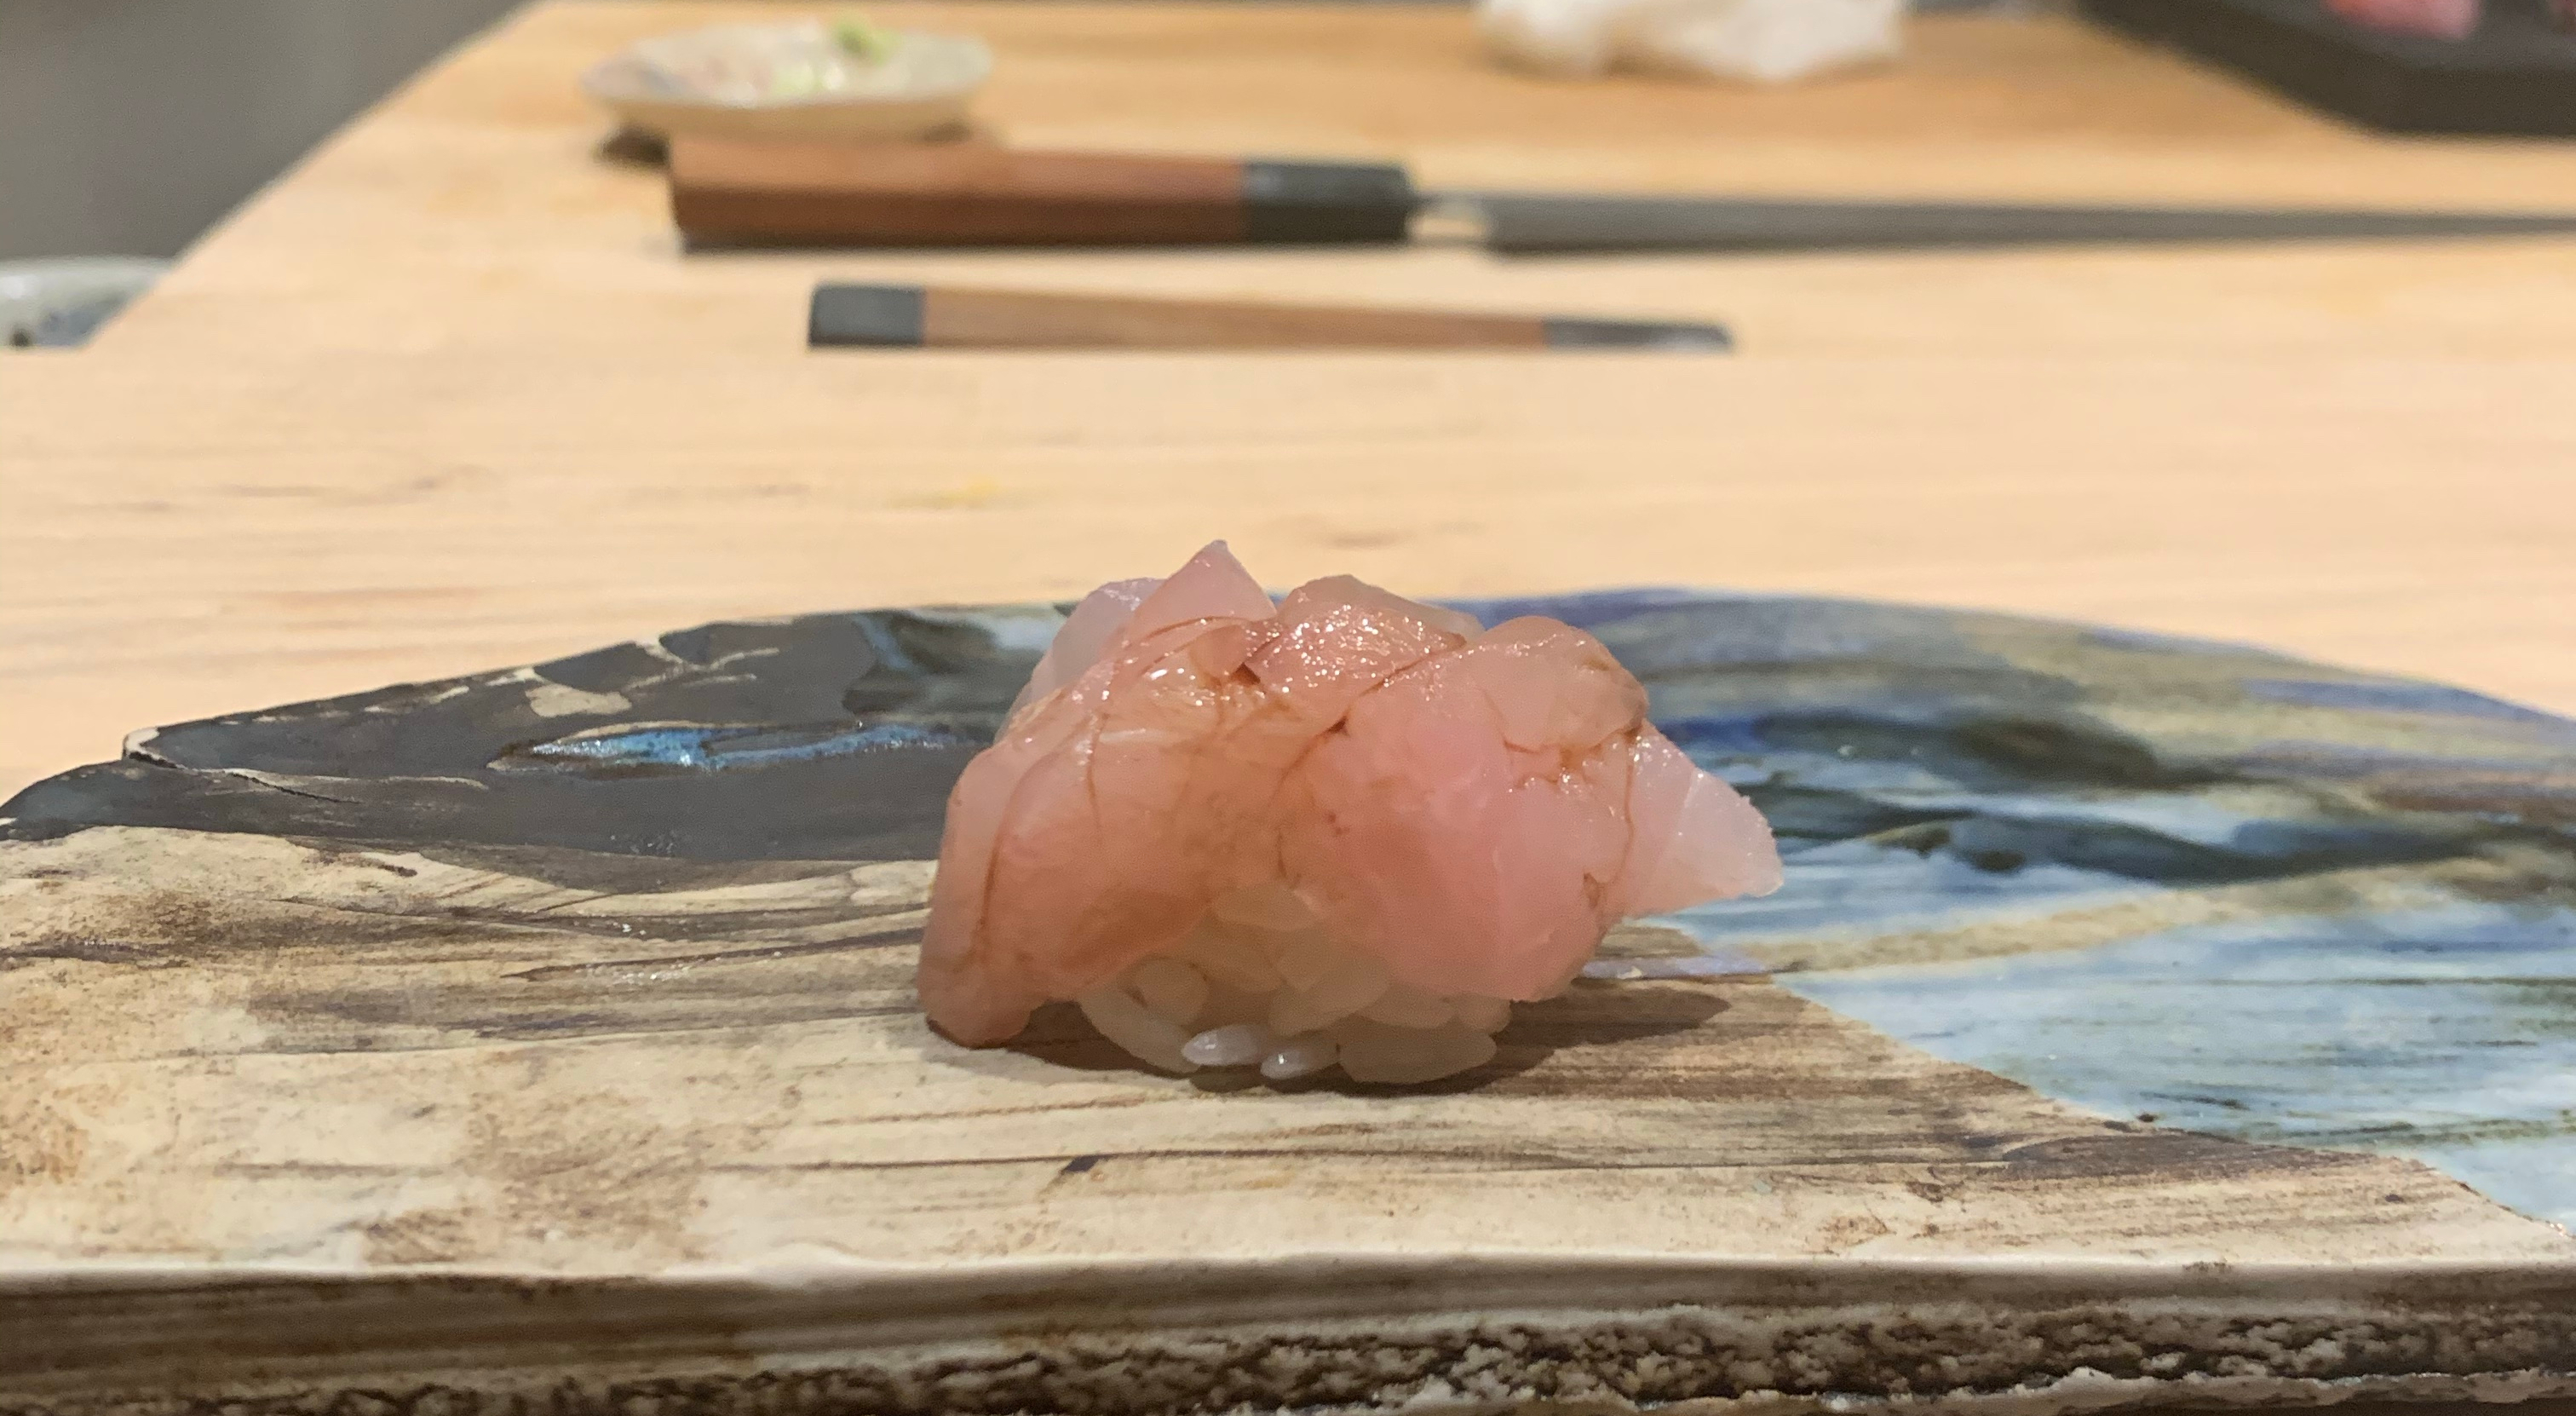 One piece of nigiri sushi with a white fish on top. The fish has been brushed with soy sauce lightly.